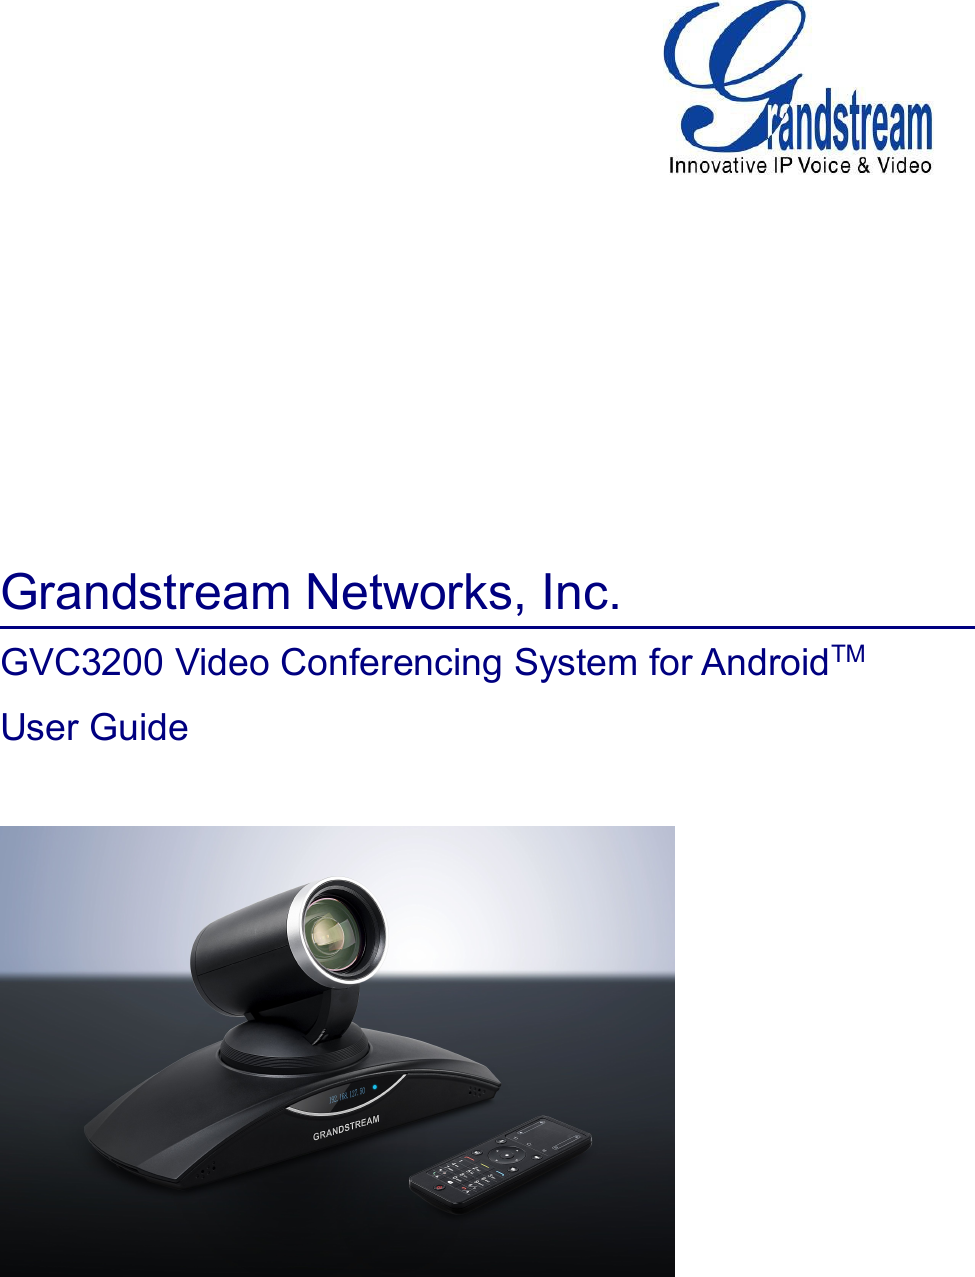 Grandstream Networks, Inc.GVC3200 Video Conferencing System for AndroidTMUser Guide